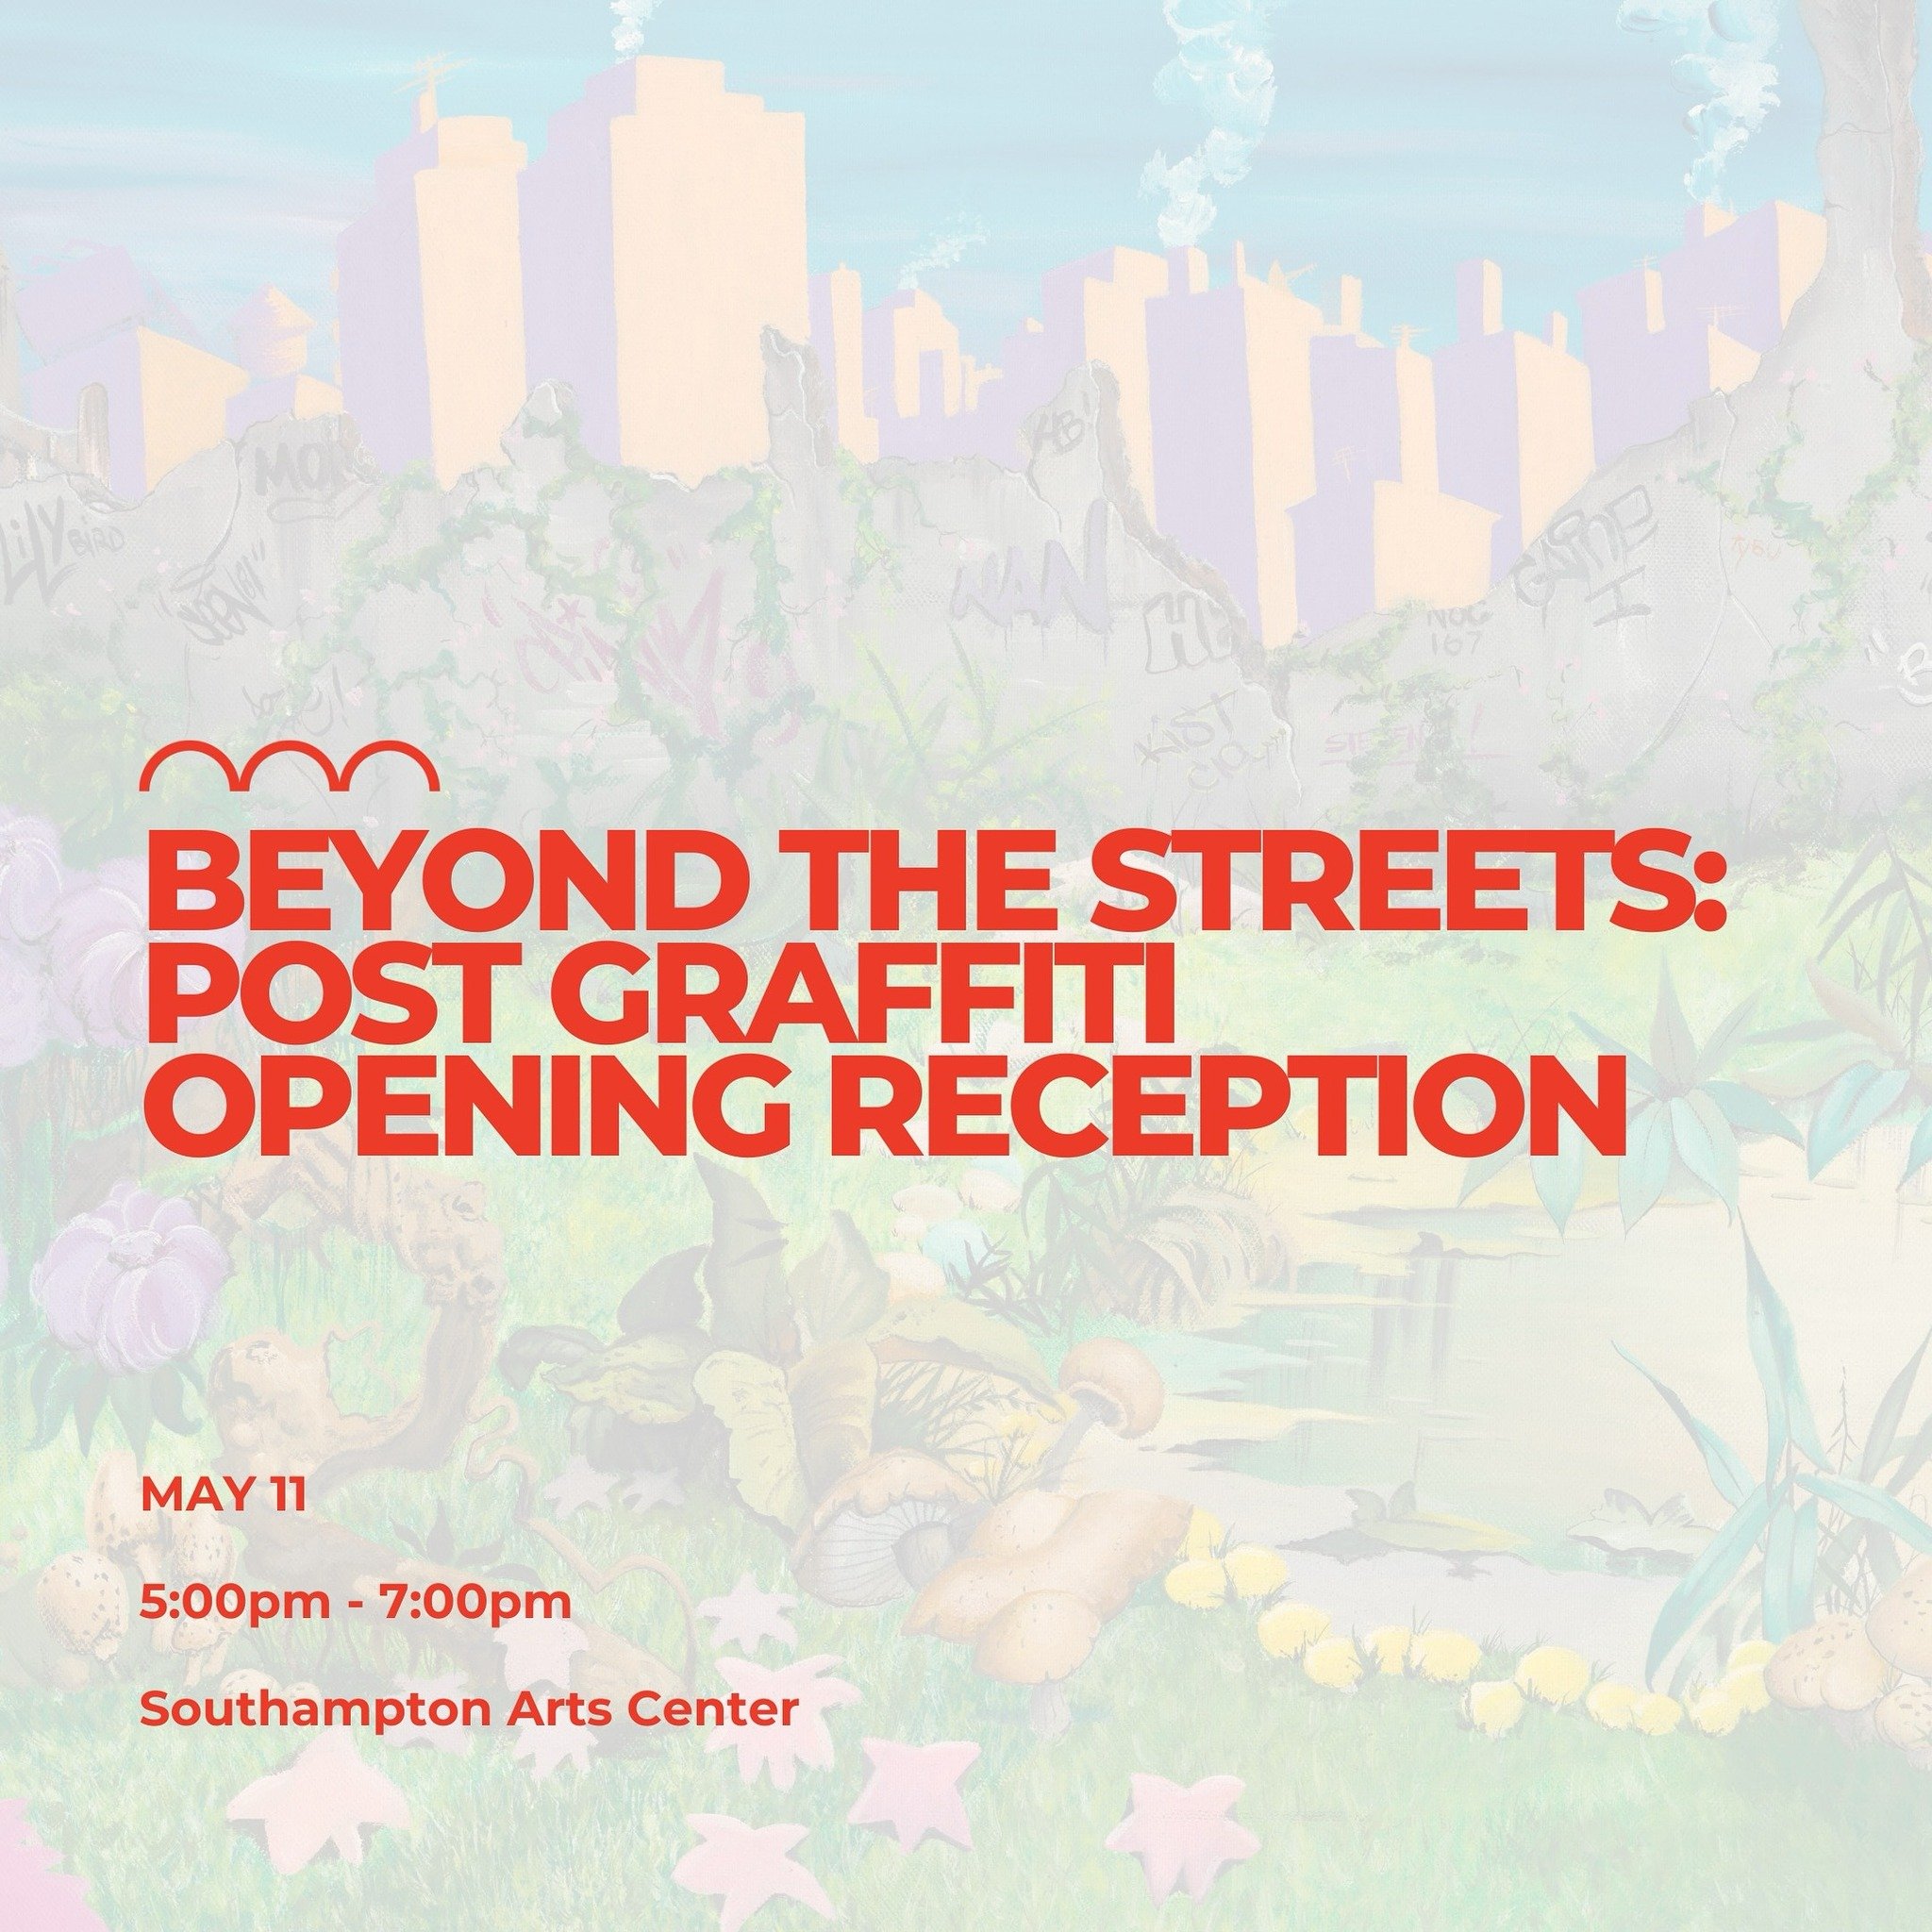 Explore the transformation of street art at &lsquo;Beyond the Streets: Post Graffiti Opening Reception&rsquo; on May 11 from 5:00 PM to 7:00 PM!

Witness the journey from NYC&rsquo;s rebellious subway art of the 70s and 80s to today&rsquo;s globally 